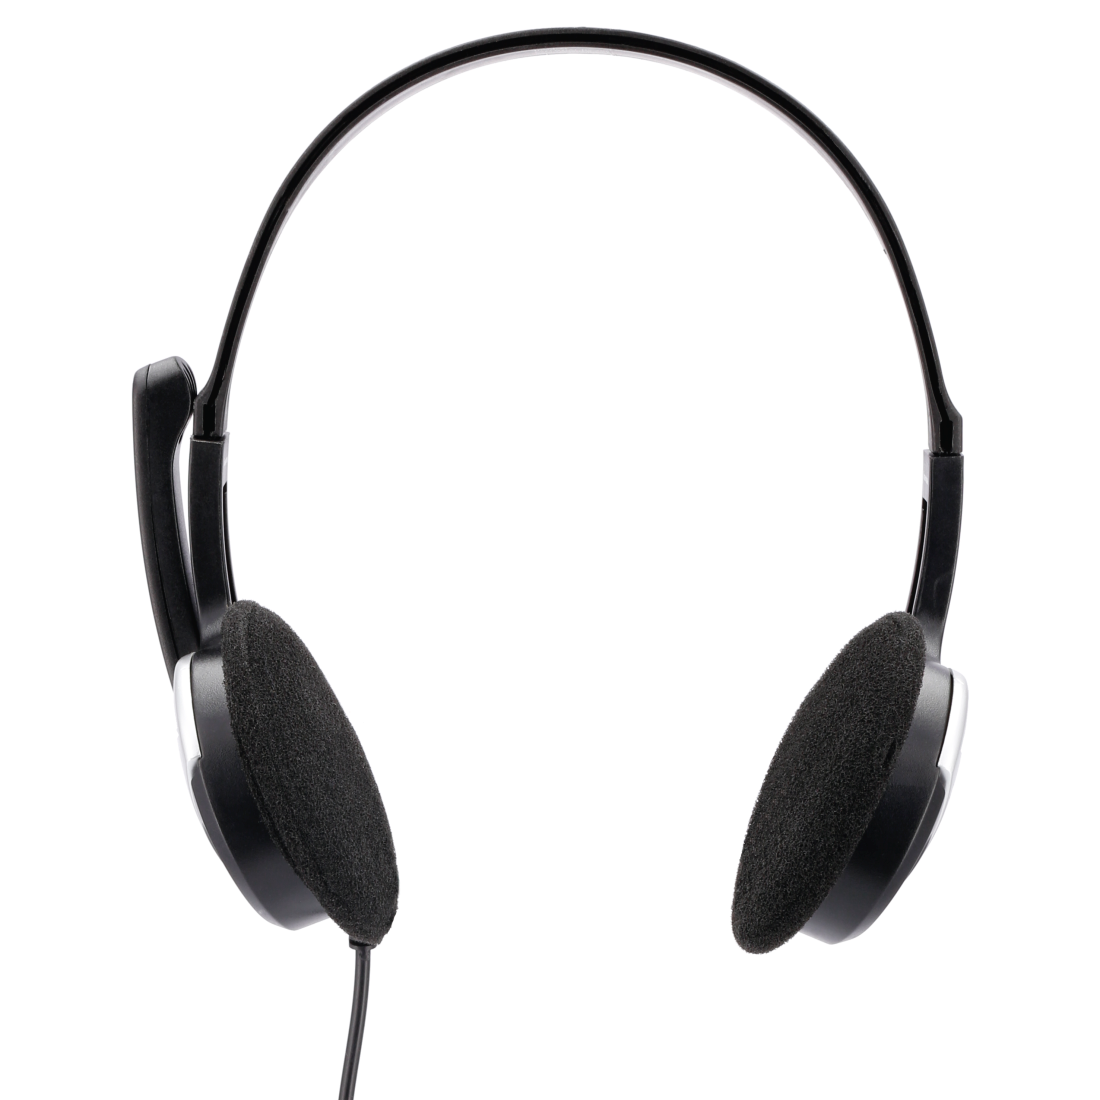 Hama HS-P100 PC Office Headset | Comms Express